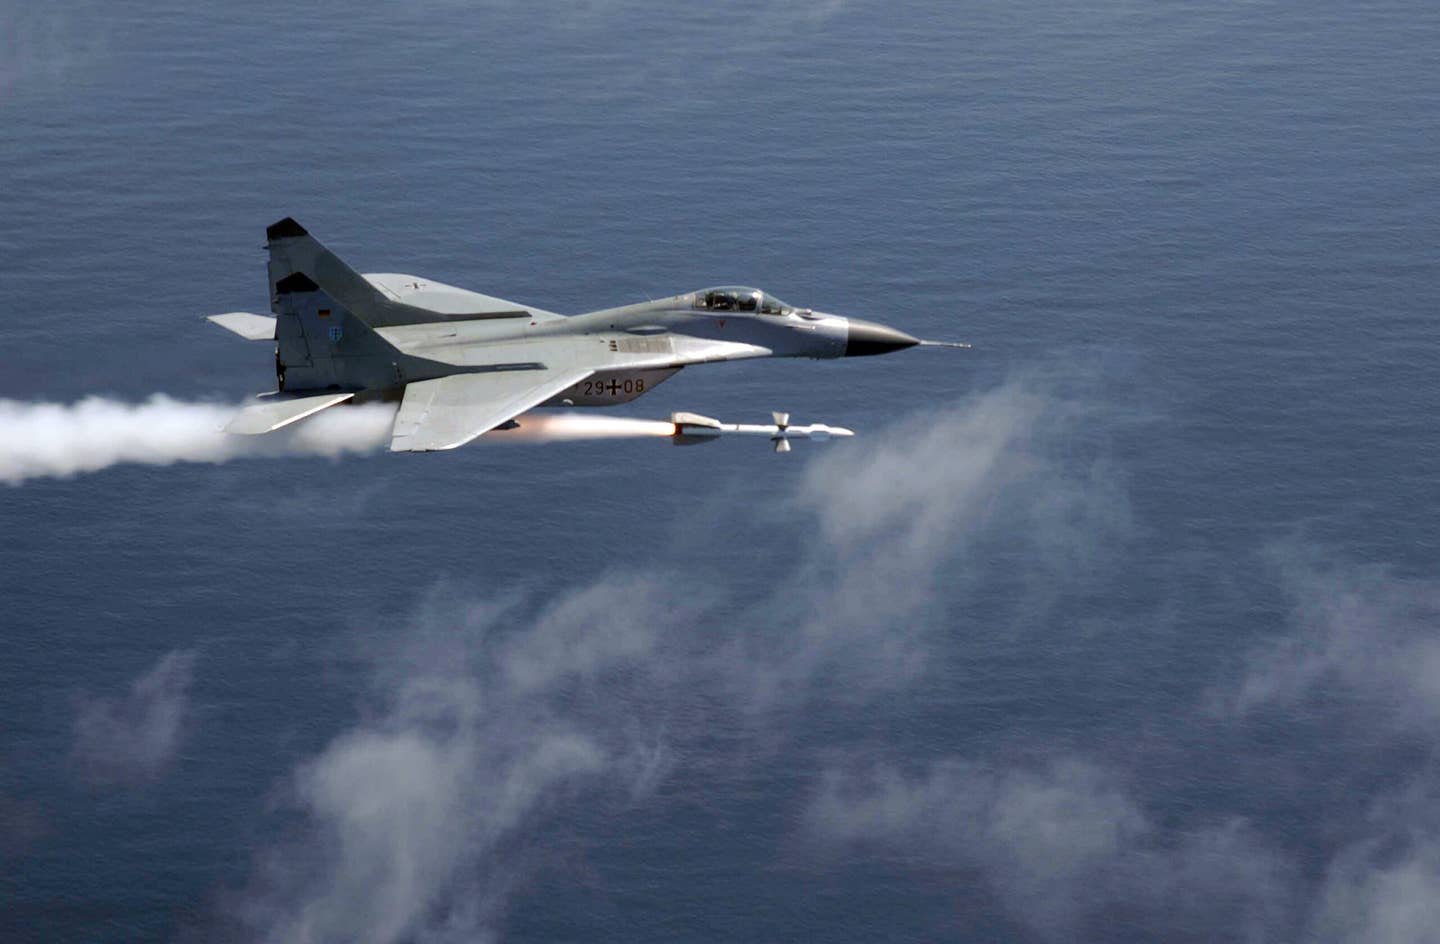 A German Luftwaffe MiG-29 fires a radar-guided R-27R air-to-air missile at a QF-4 full-scale aerial target drone during a live-fire weapons training mission in the United States. <em>U.S. Air Force</em>